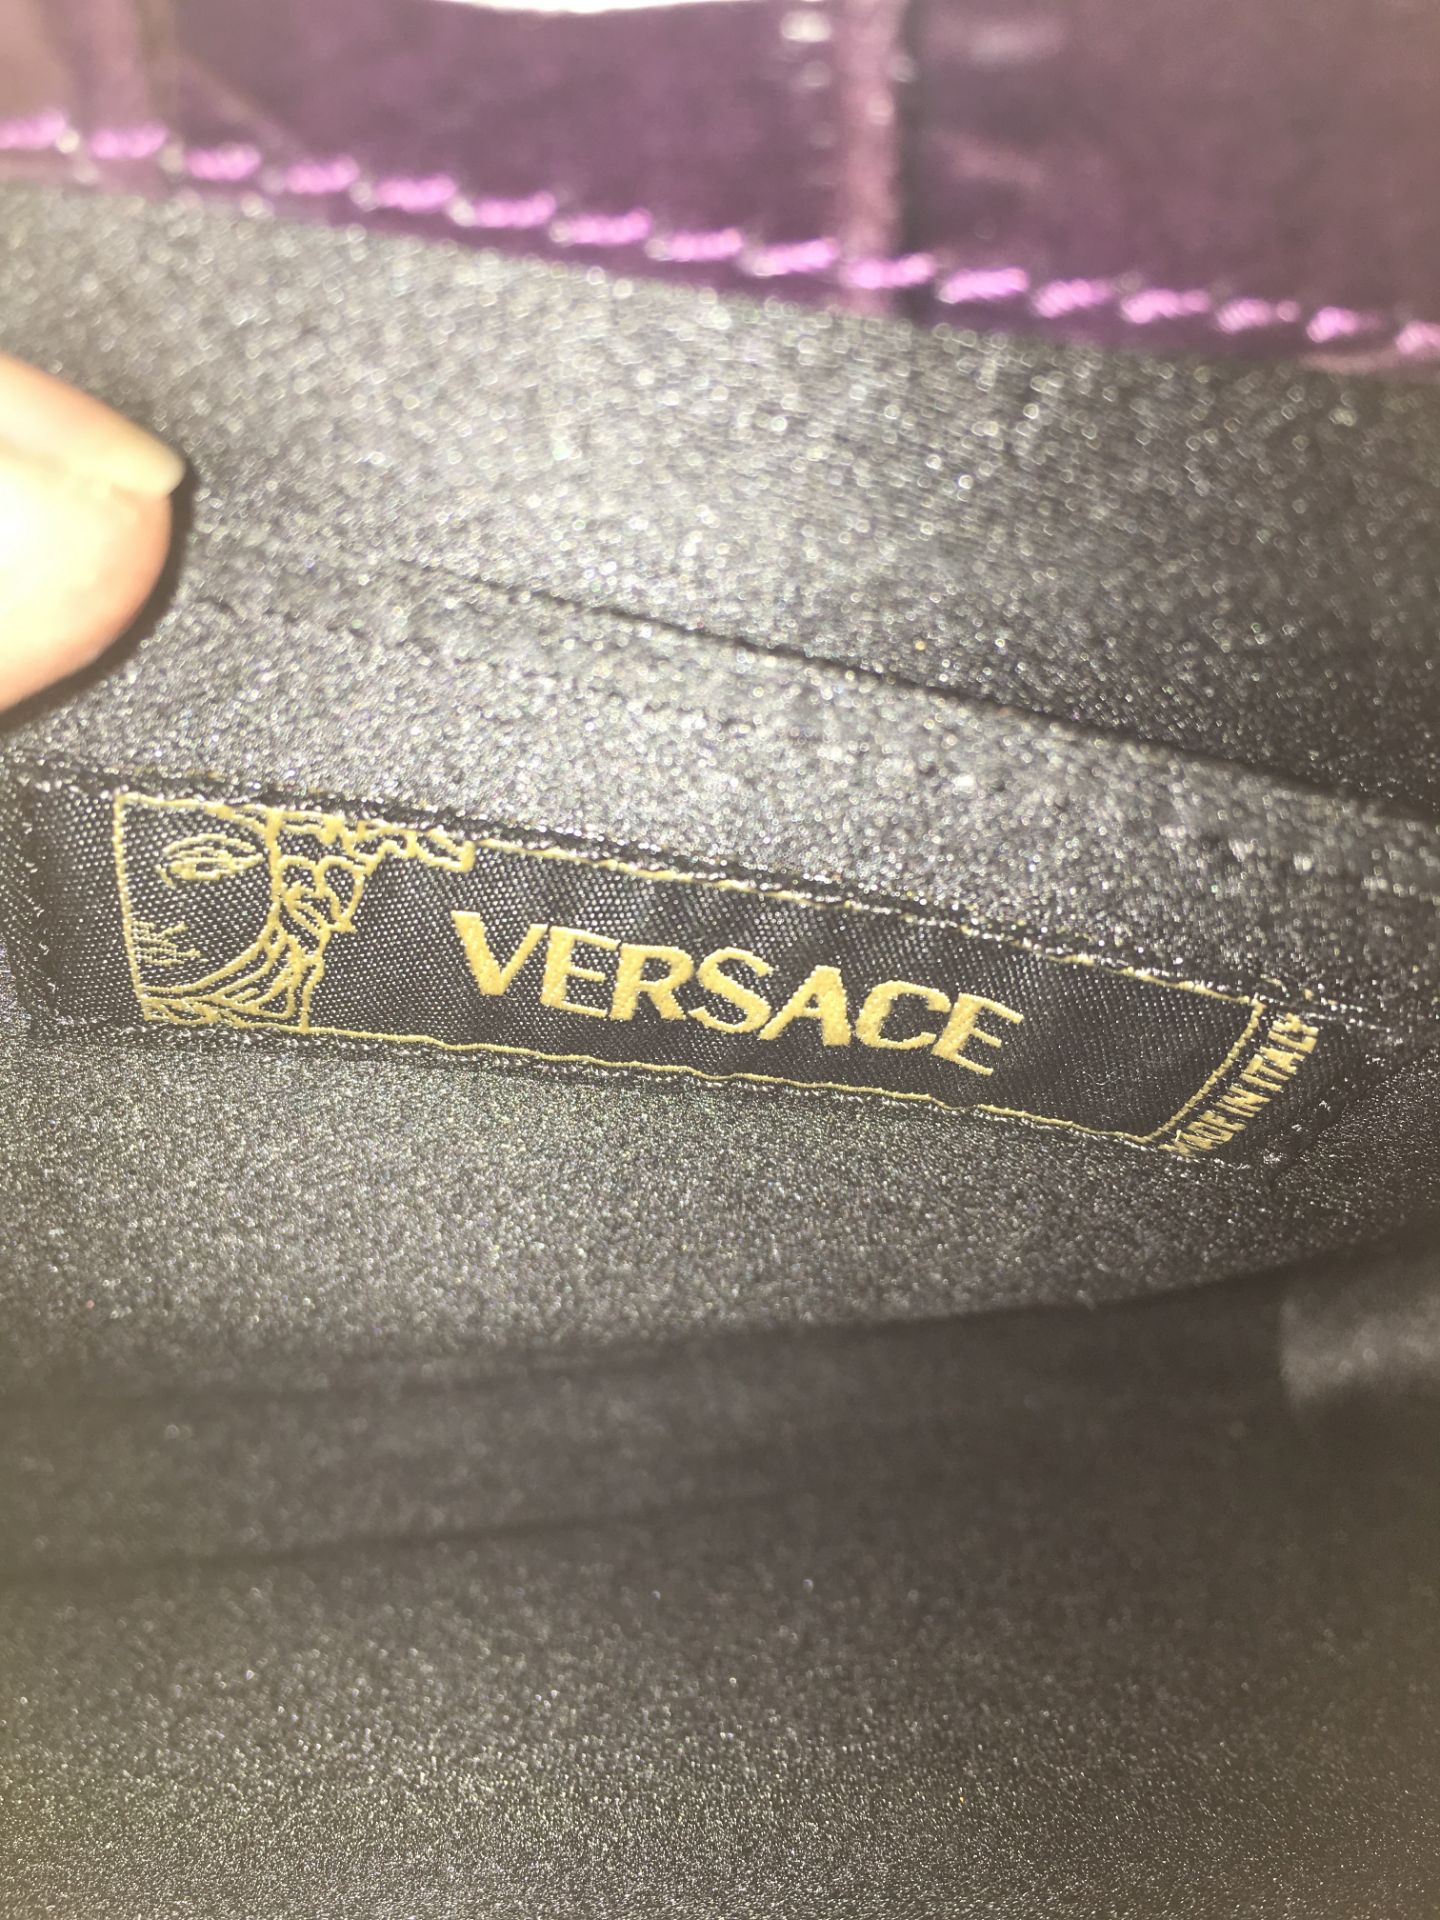 Versace bag and shoes - Image 7 of 7